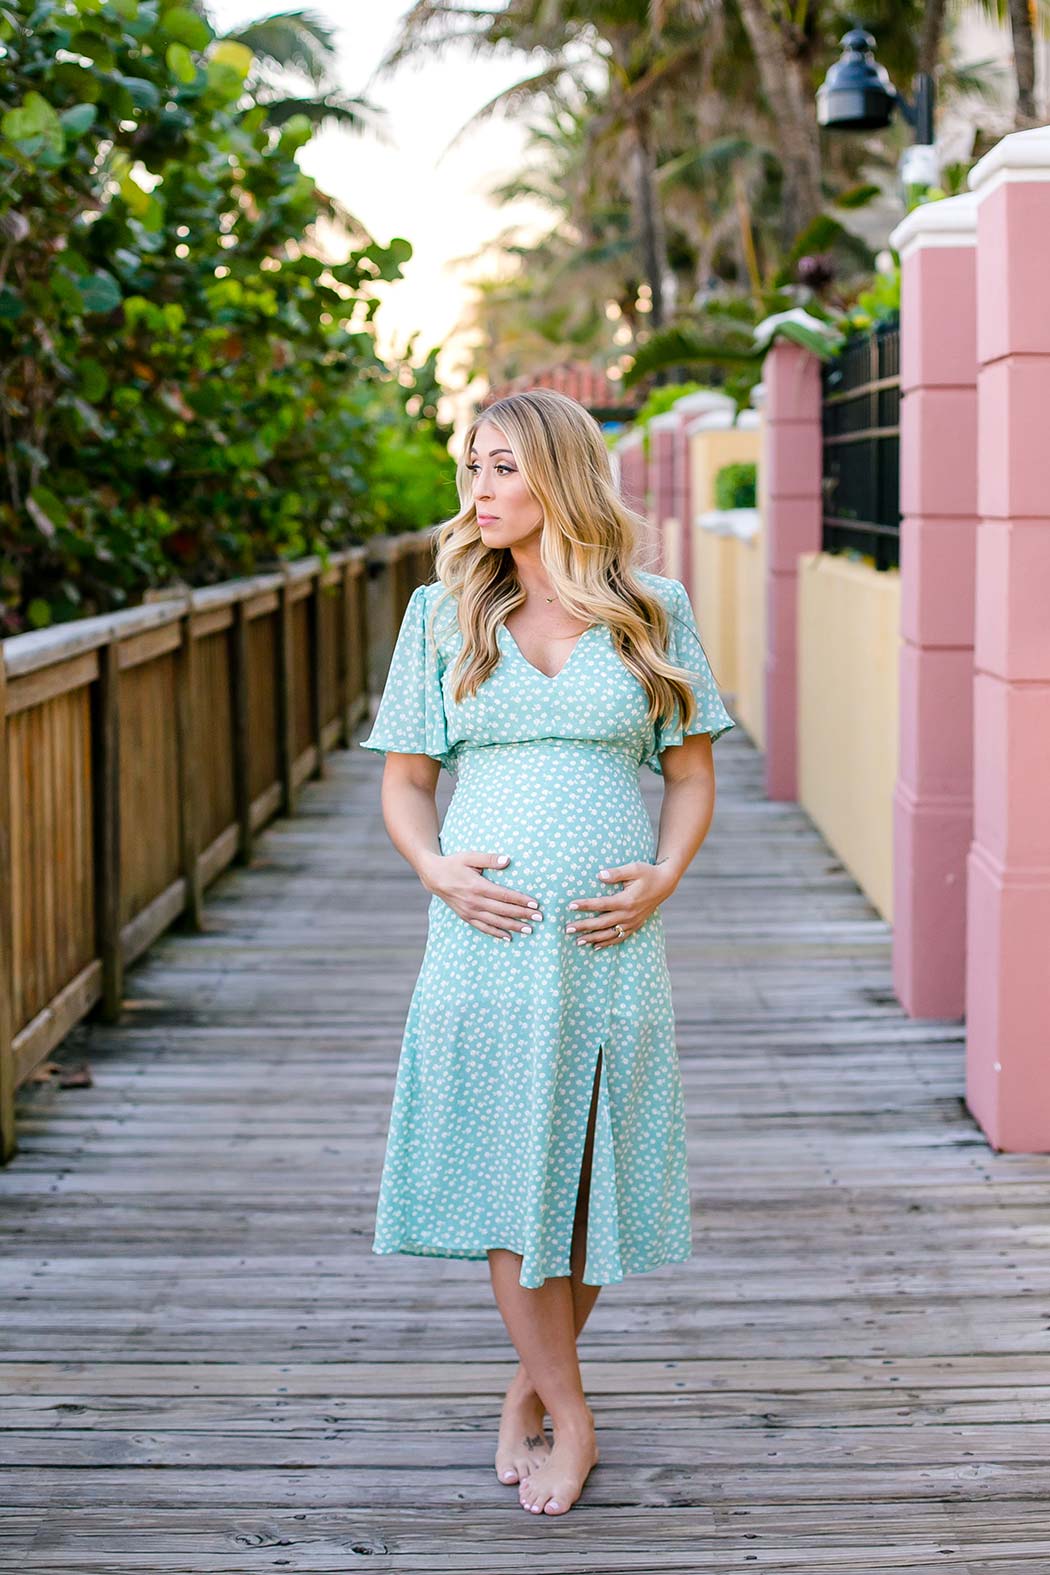 blonde girl green and white maternity dress | maternity pose idea | ideas for maternity pose photoshoot | beach maternity photoshoot south florida | south florida maternity photographer